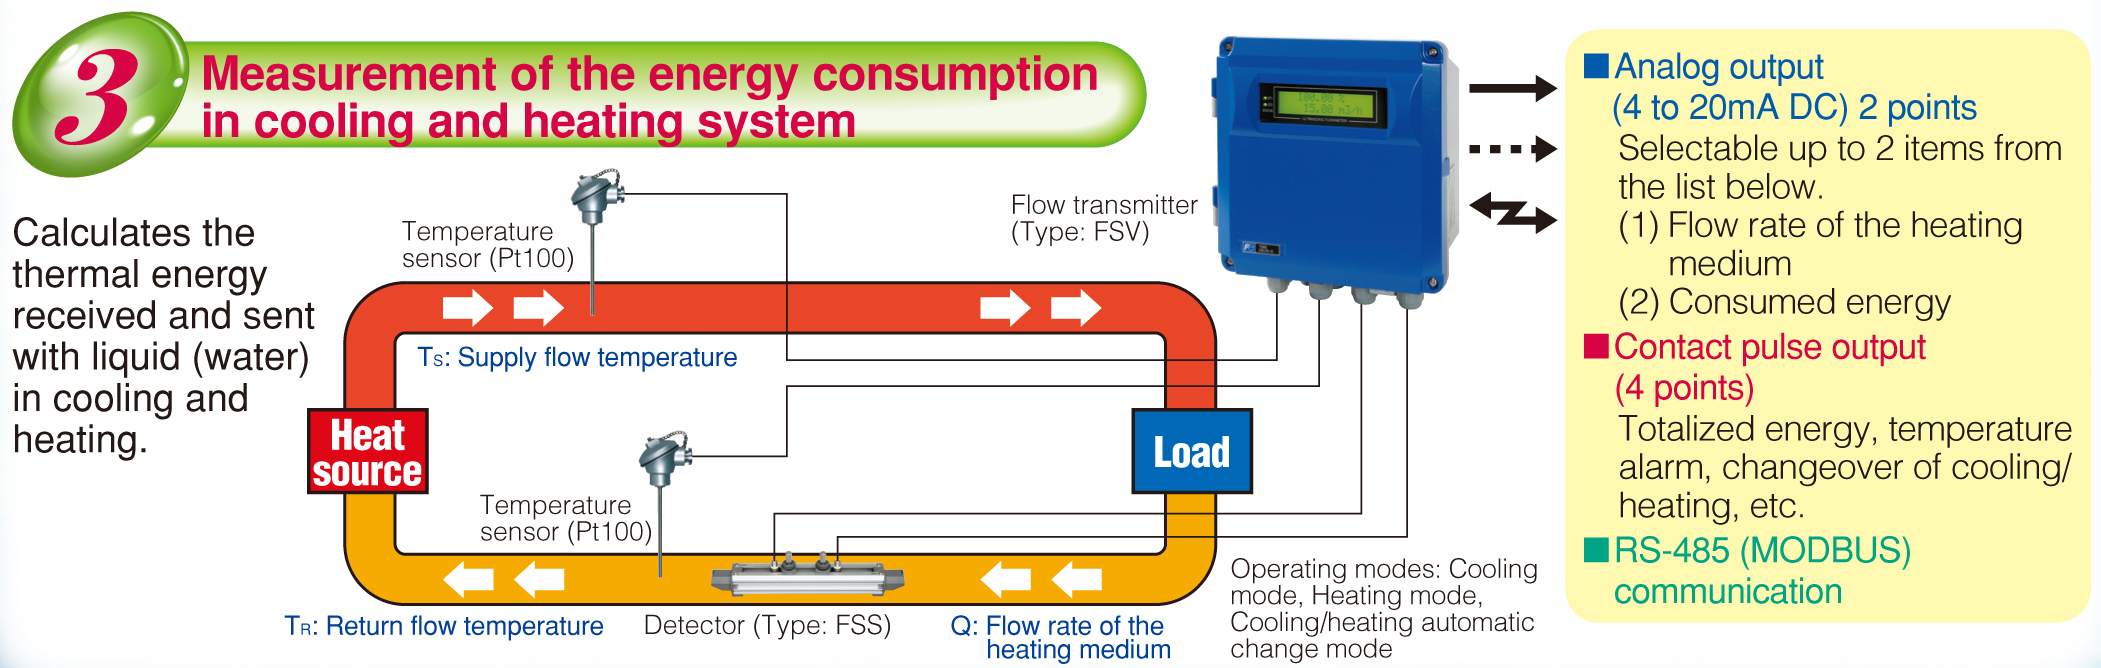 Measurement of energy consumption in cooling and heating system